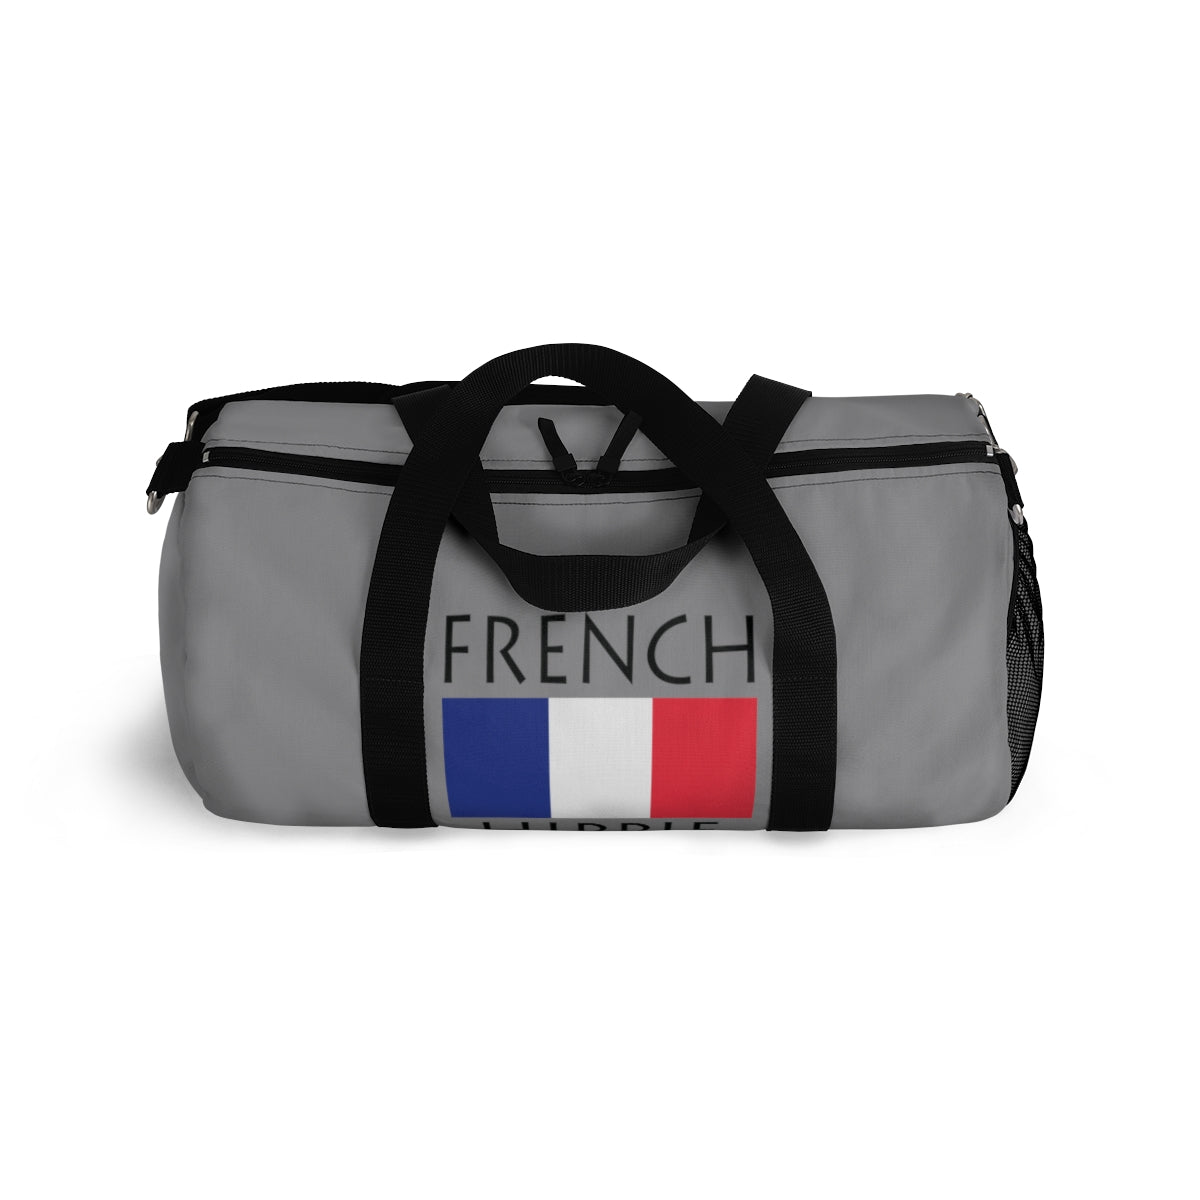 French Flag Hippie™ Carry Everything Duffel Bag